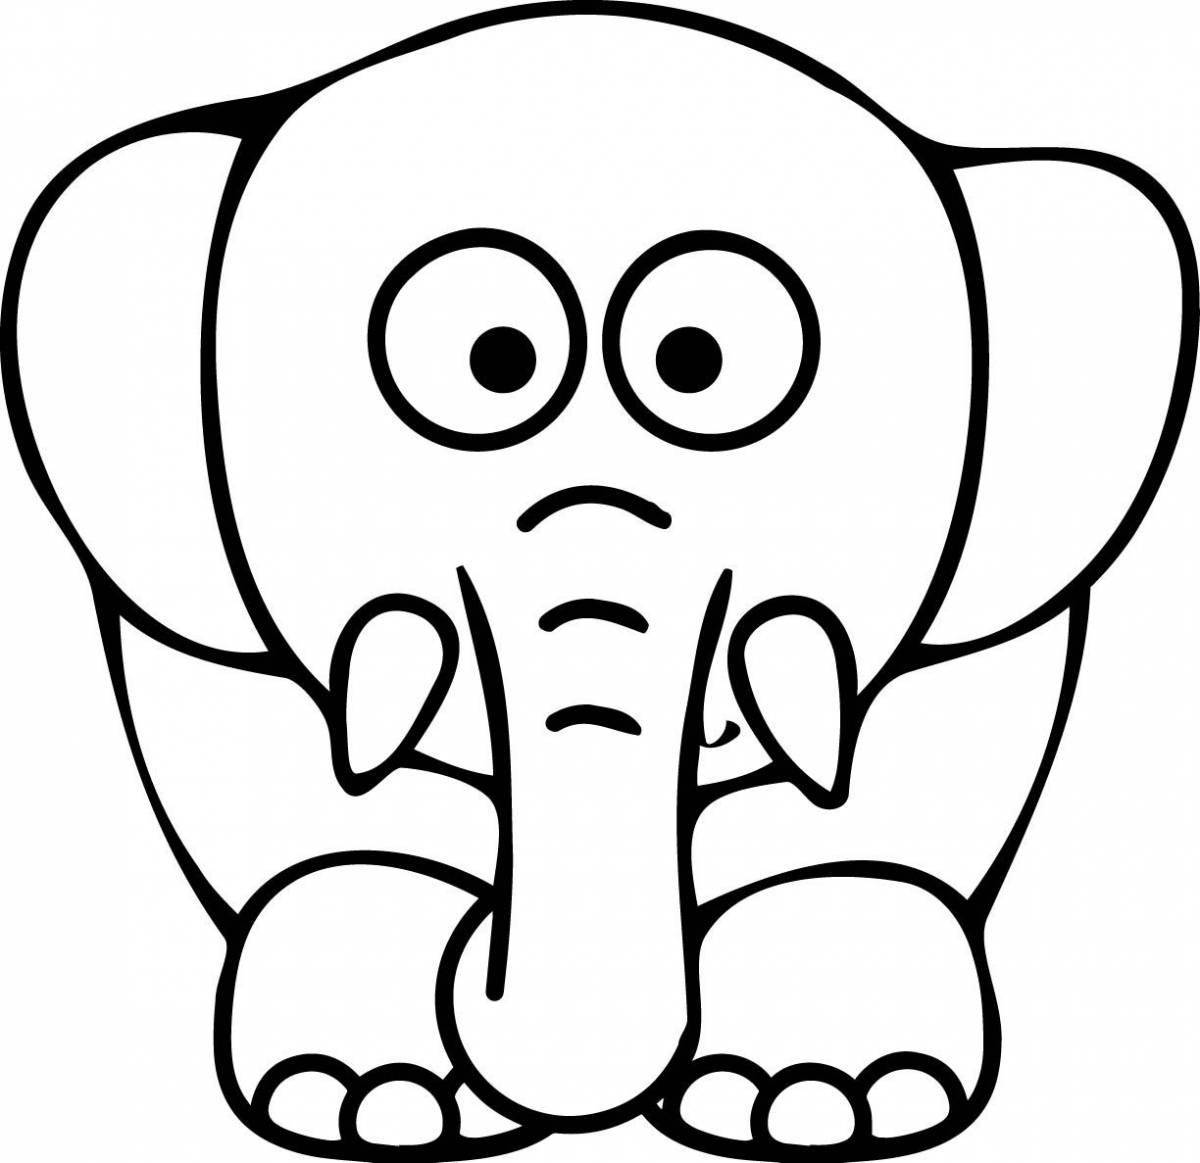 Wonderful elephant coloring pages for kids